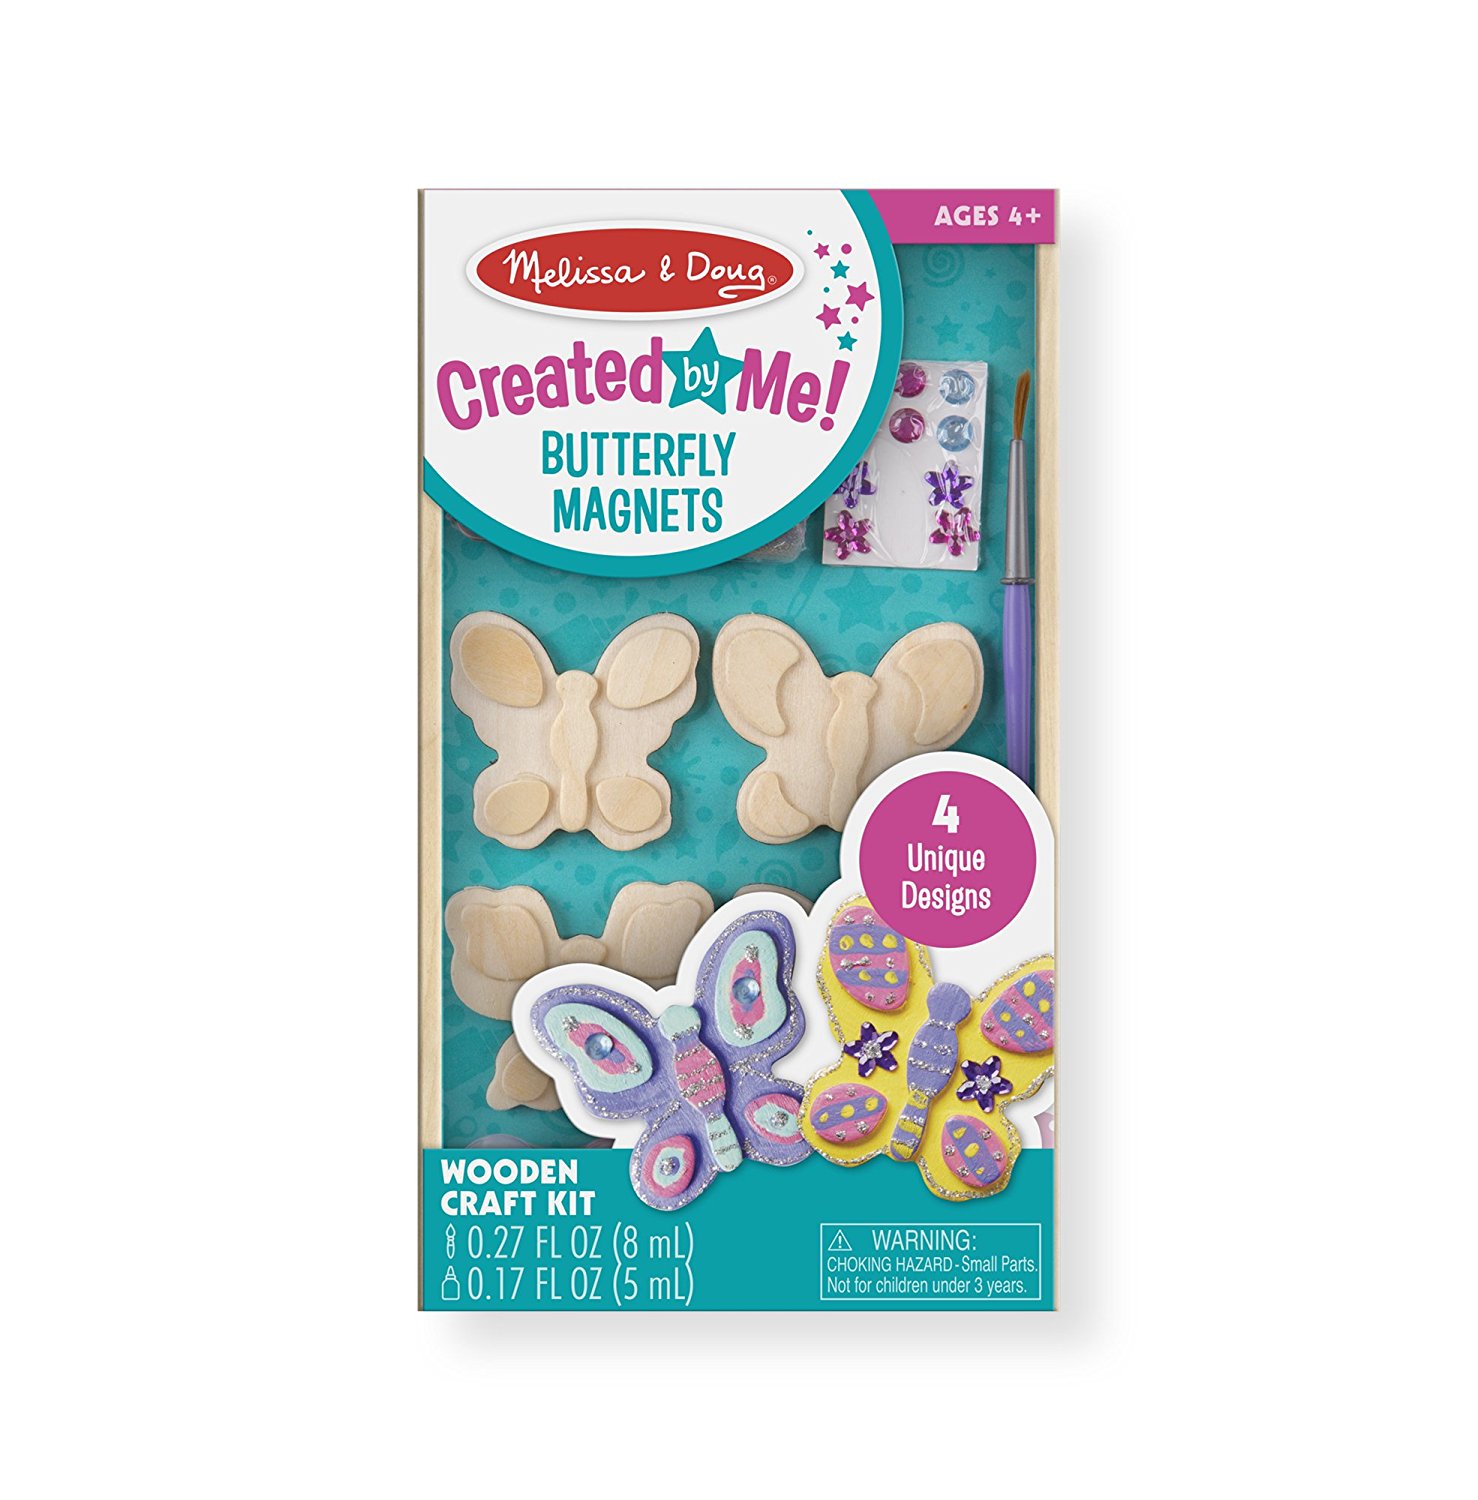 Melissa & Doug Wooden Butterfly Magnets Craft Kit Only $4.99!